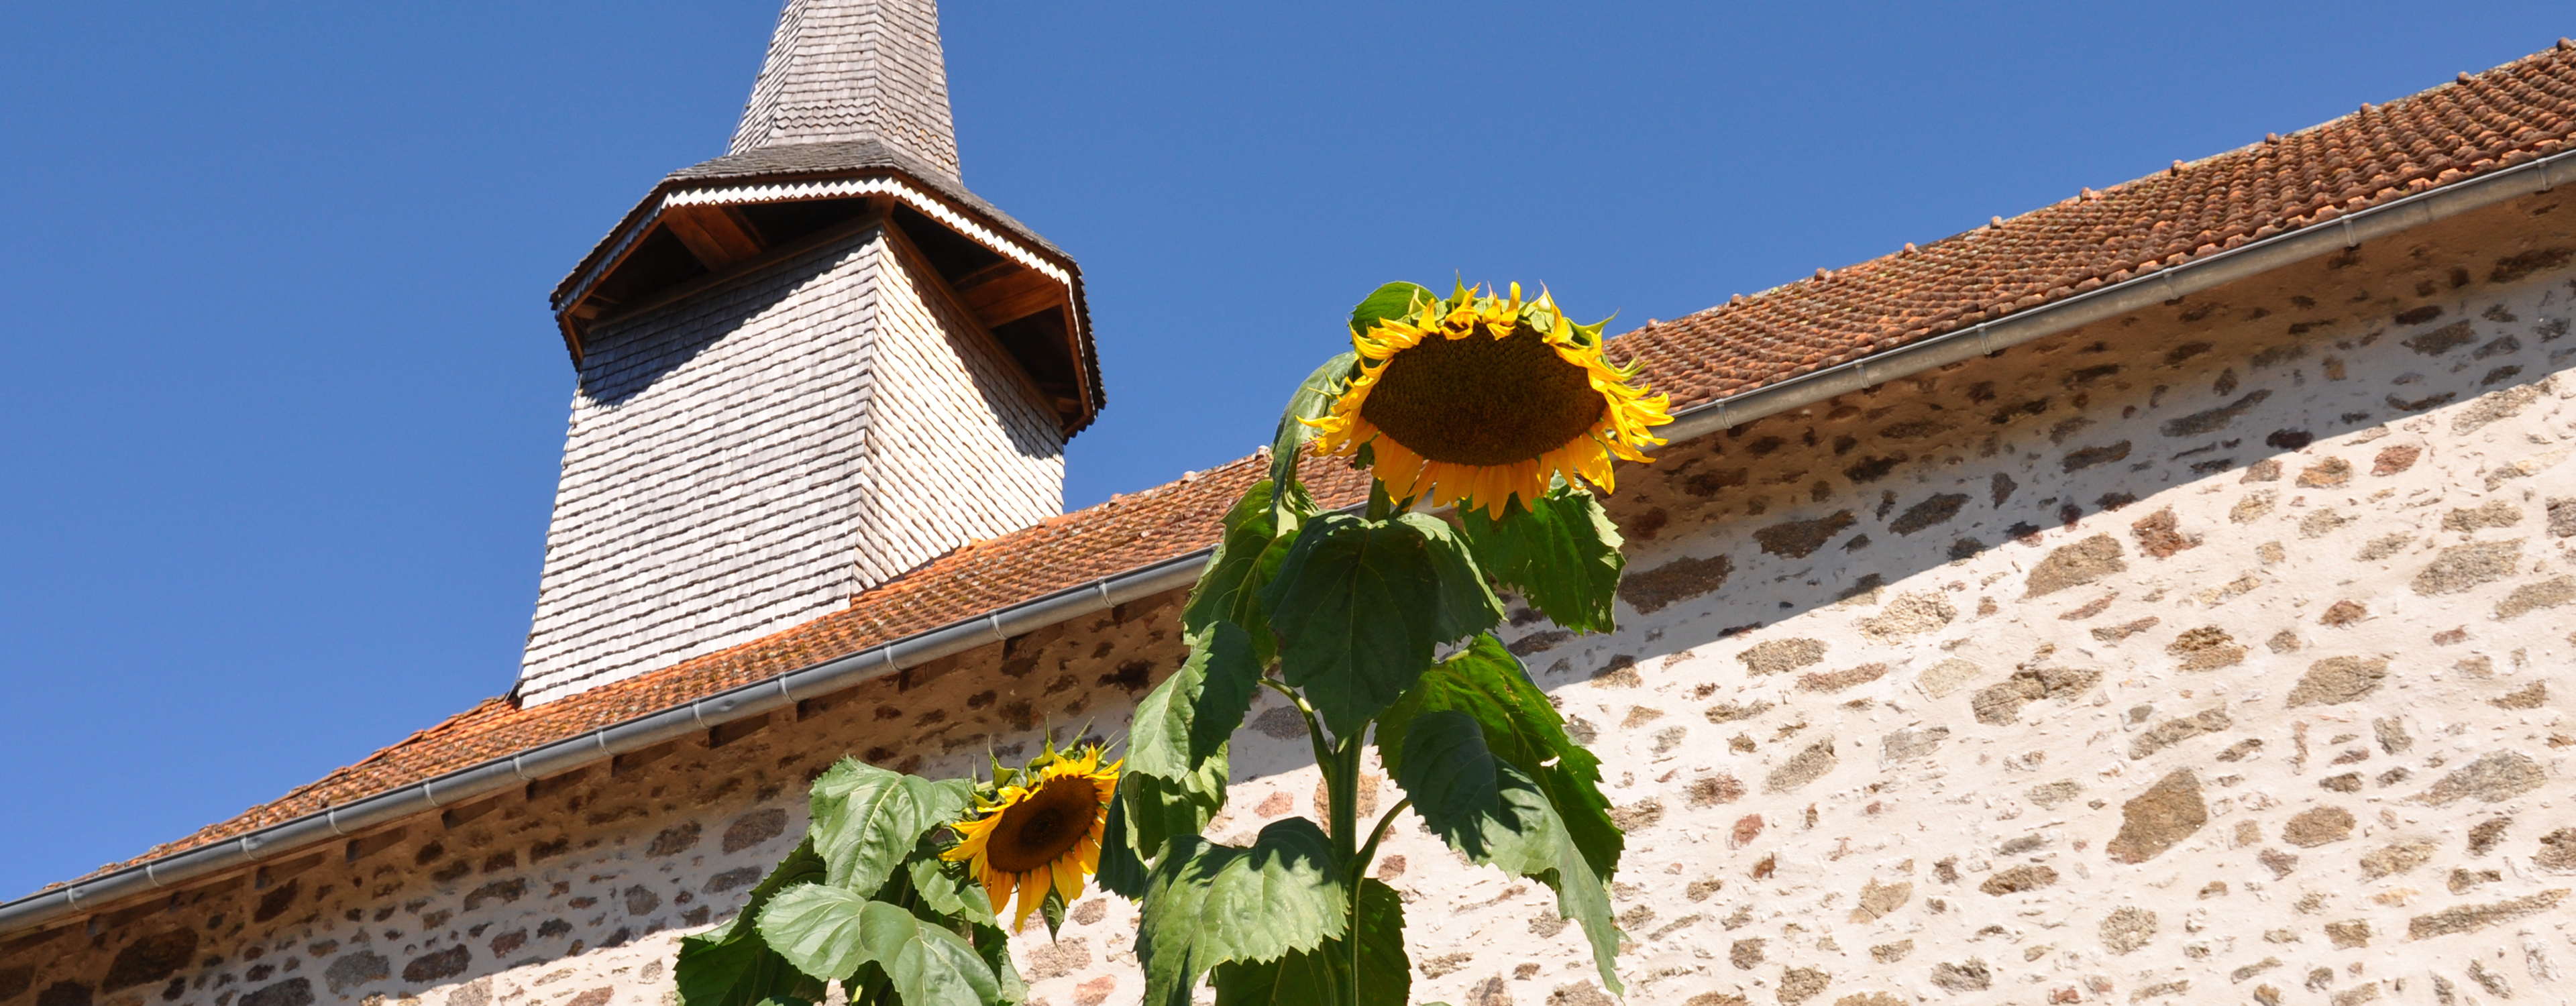 Sunflowers growing in front of church at Etang de Azat-Chatenet fishing lake in France